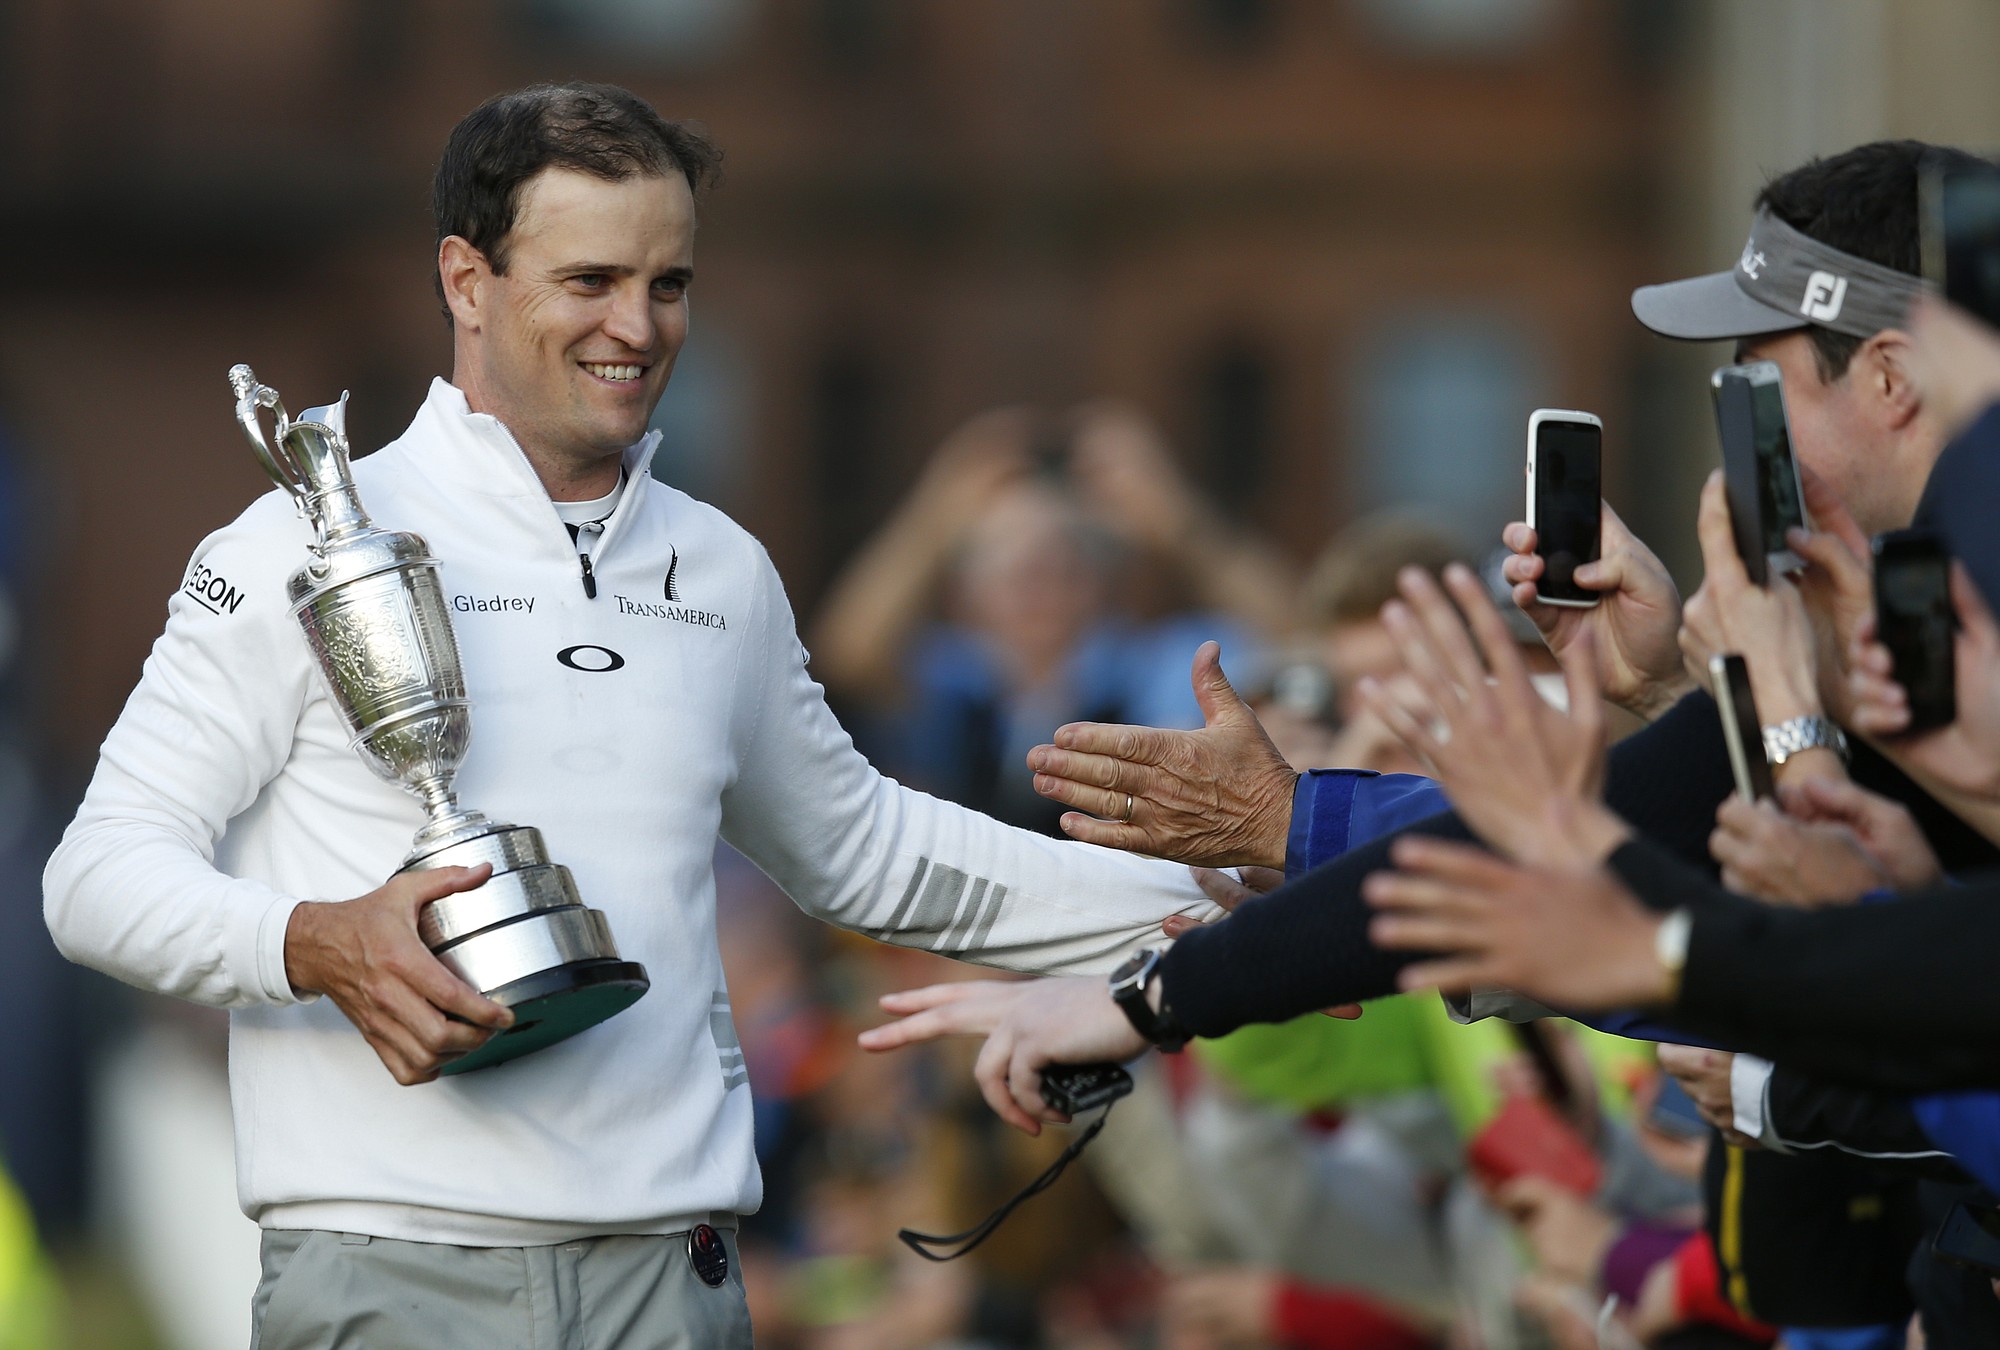 United States' Zach Johnson celebrates with members of the public as he holds the Claret Jug trophy after winning a playoff after the final round at the British Open Golf Championship at the Old Course, St. Andrews, Scotland, on Monday, July 20, 2015.